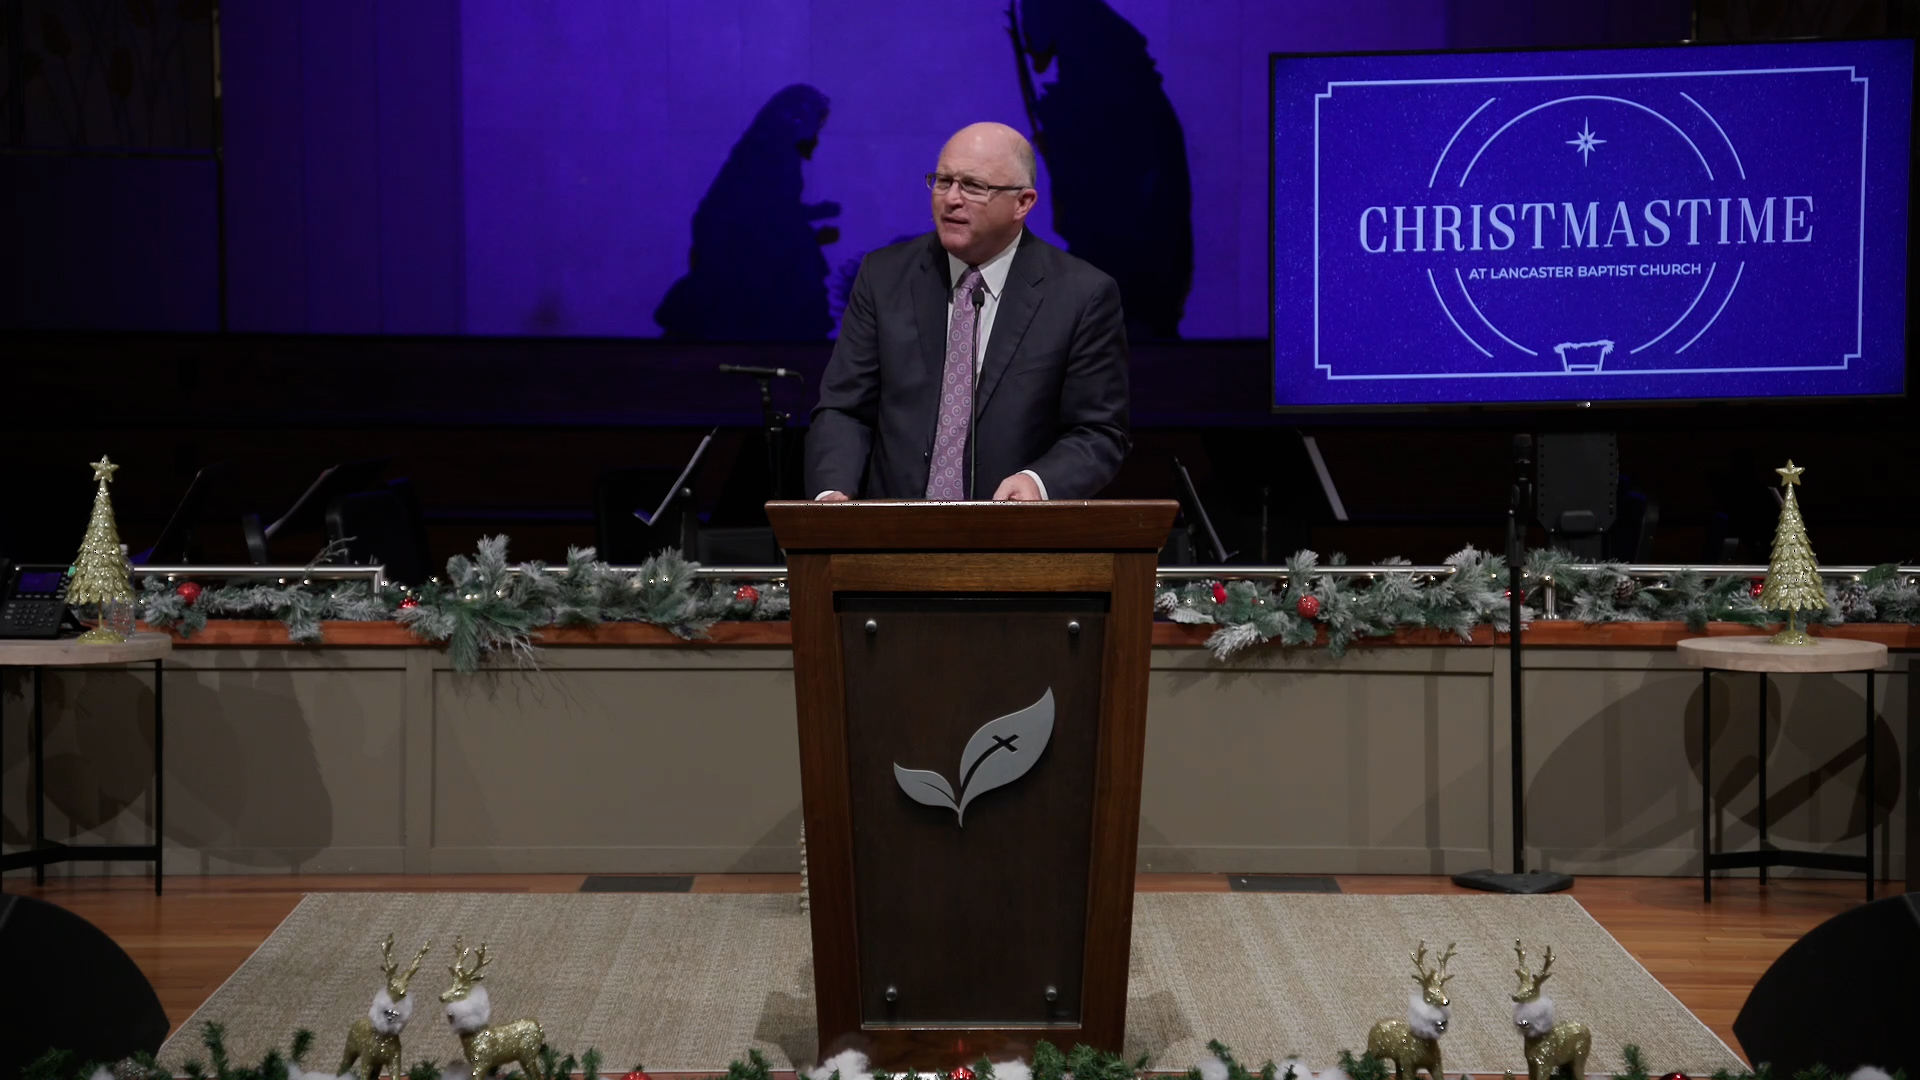 Pastor Paul Chappell: What Love Is This?